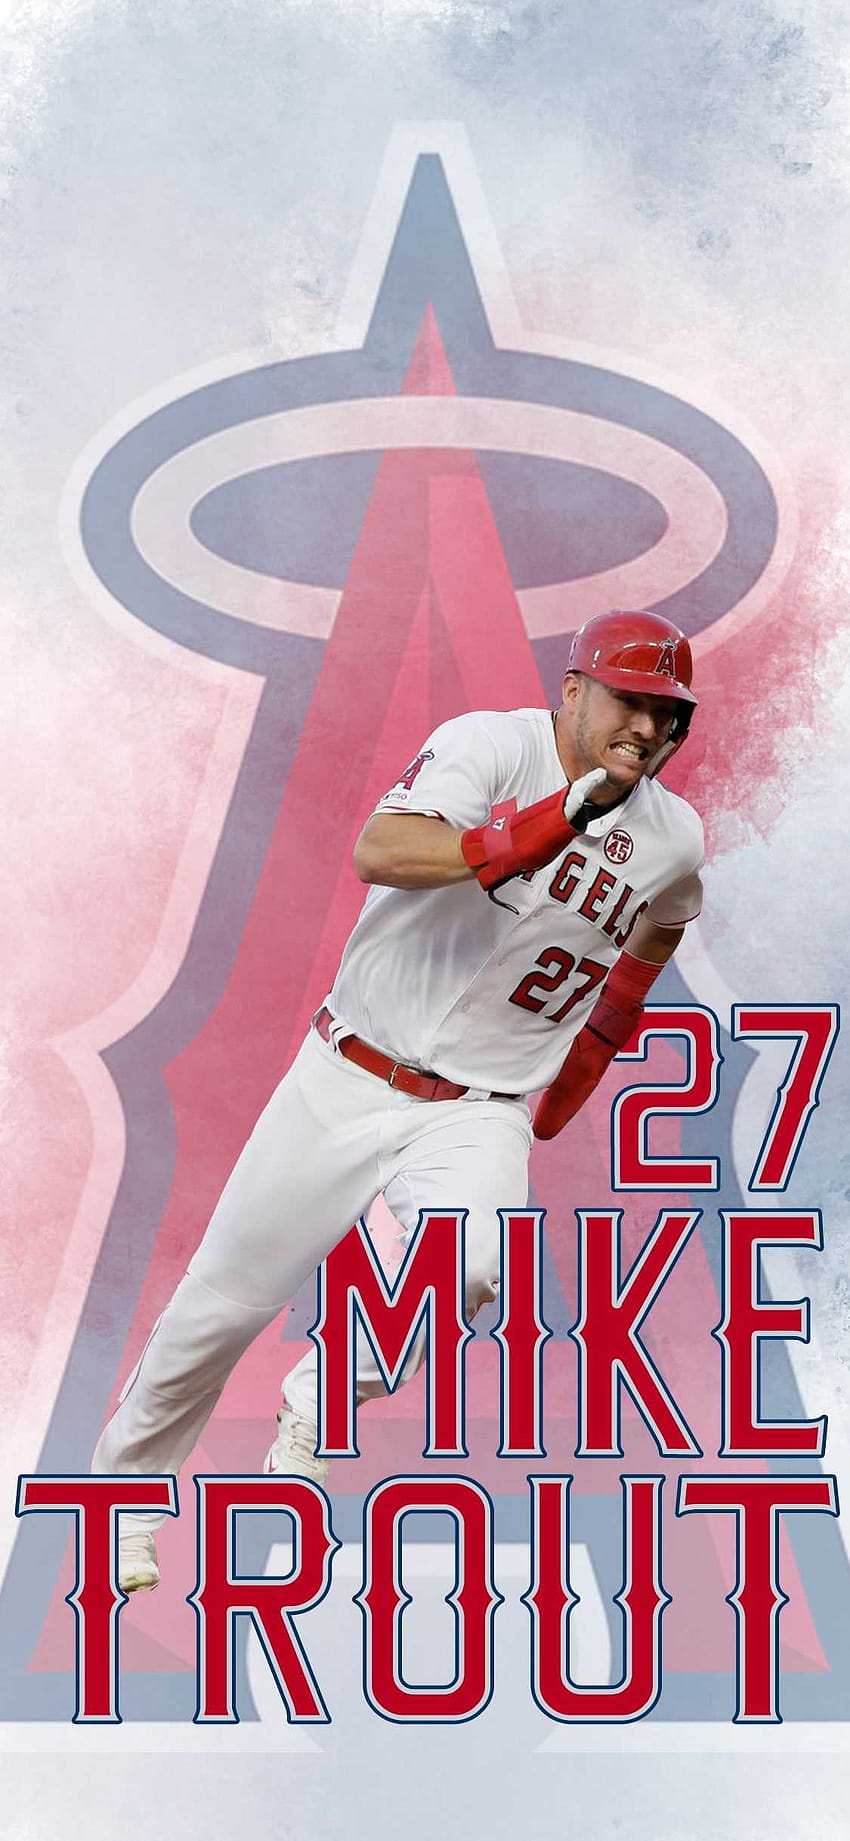 Mike Trout HD phone wallpaper